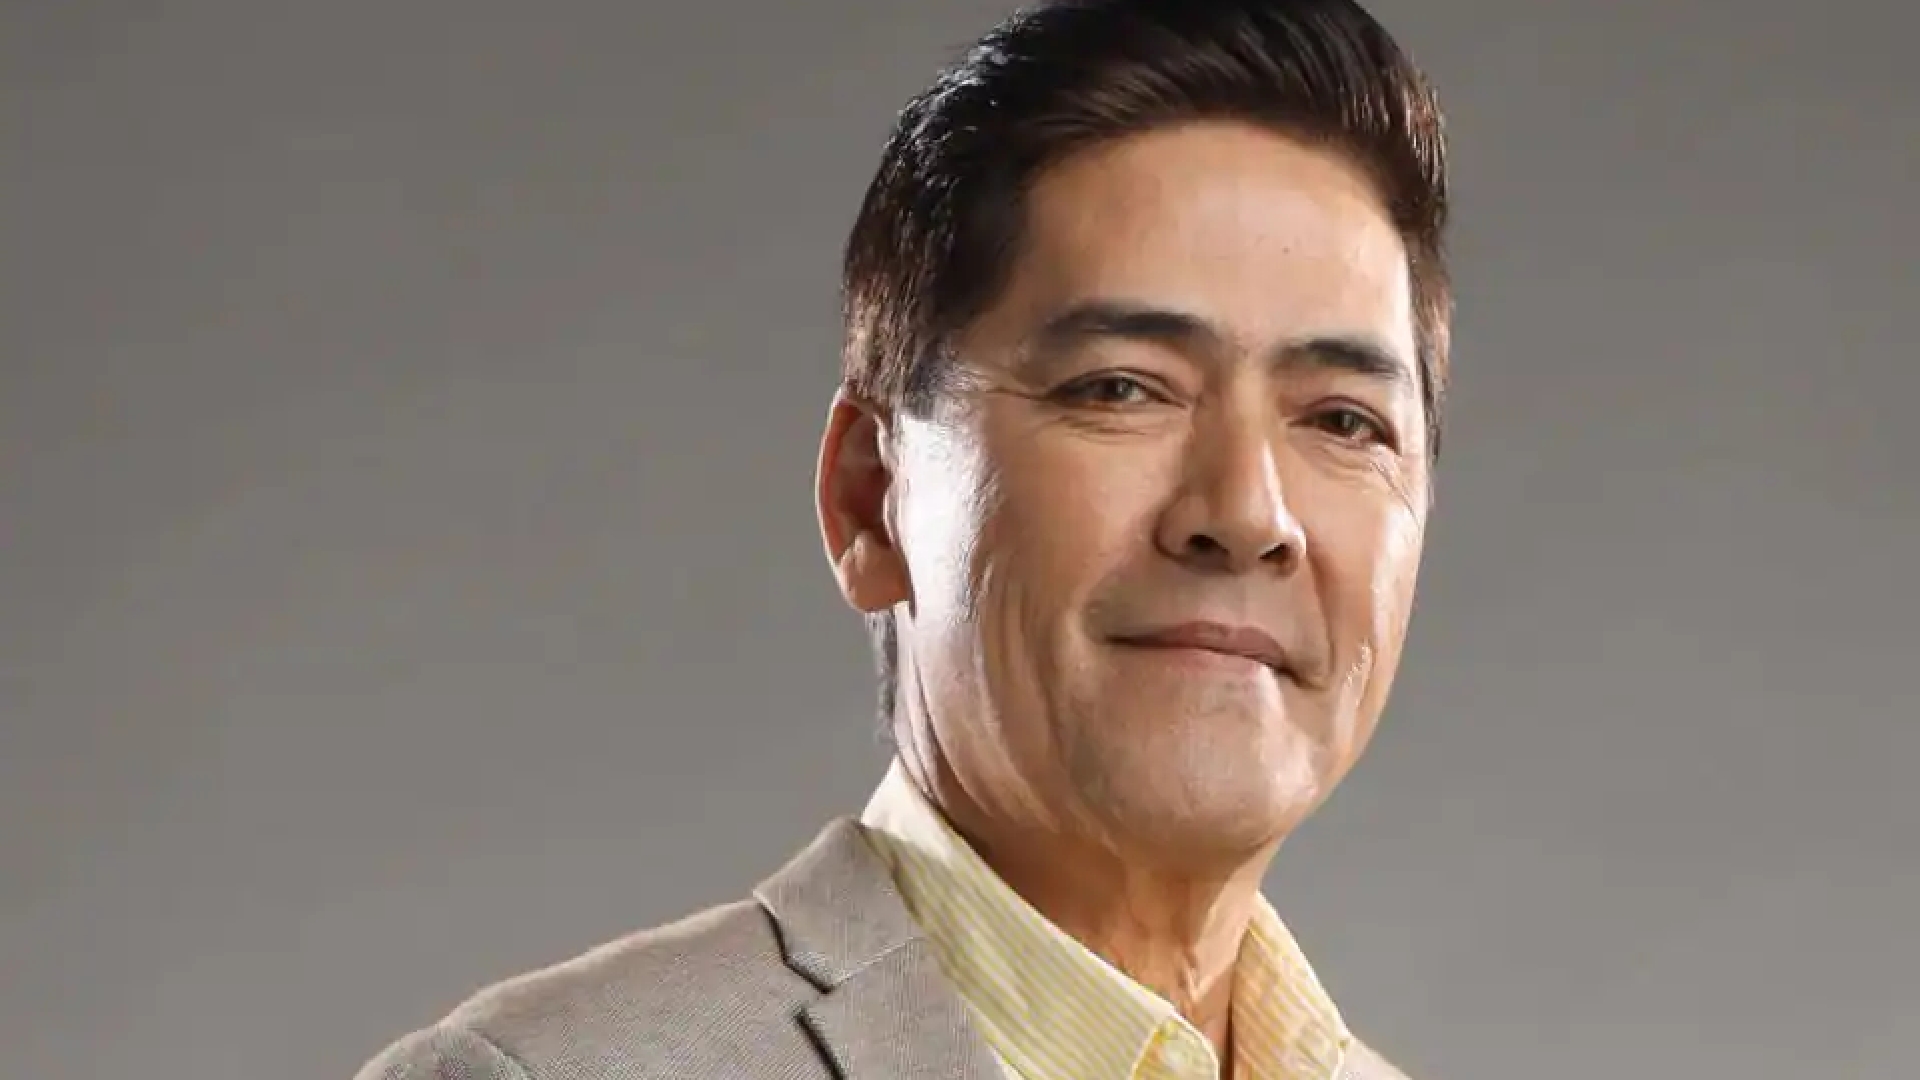 Vic Sotto claims there is no rivalry between him and the cast of "It's Showtime," saying, "Iba ang kaaway namin."